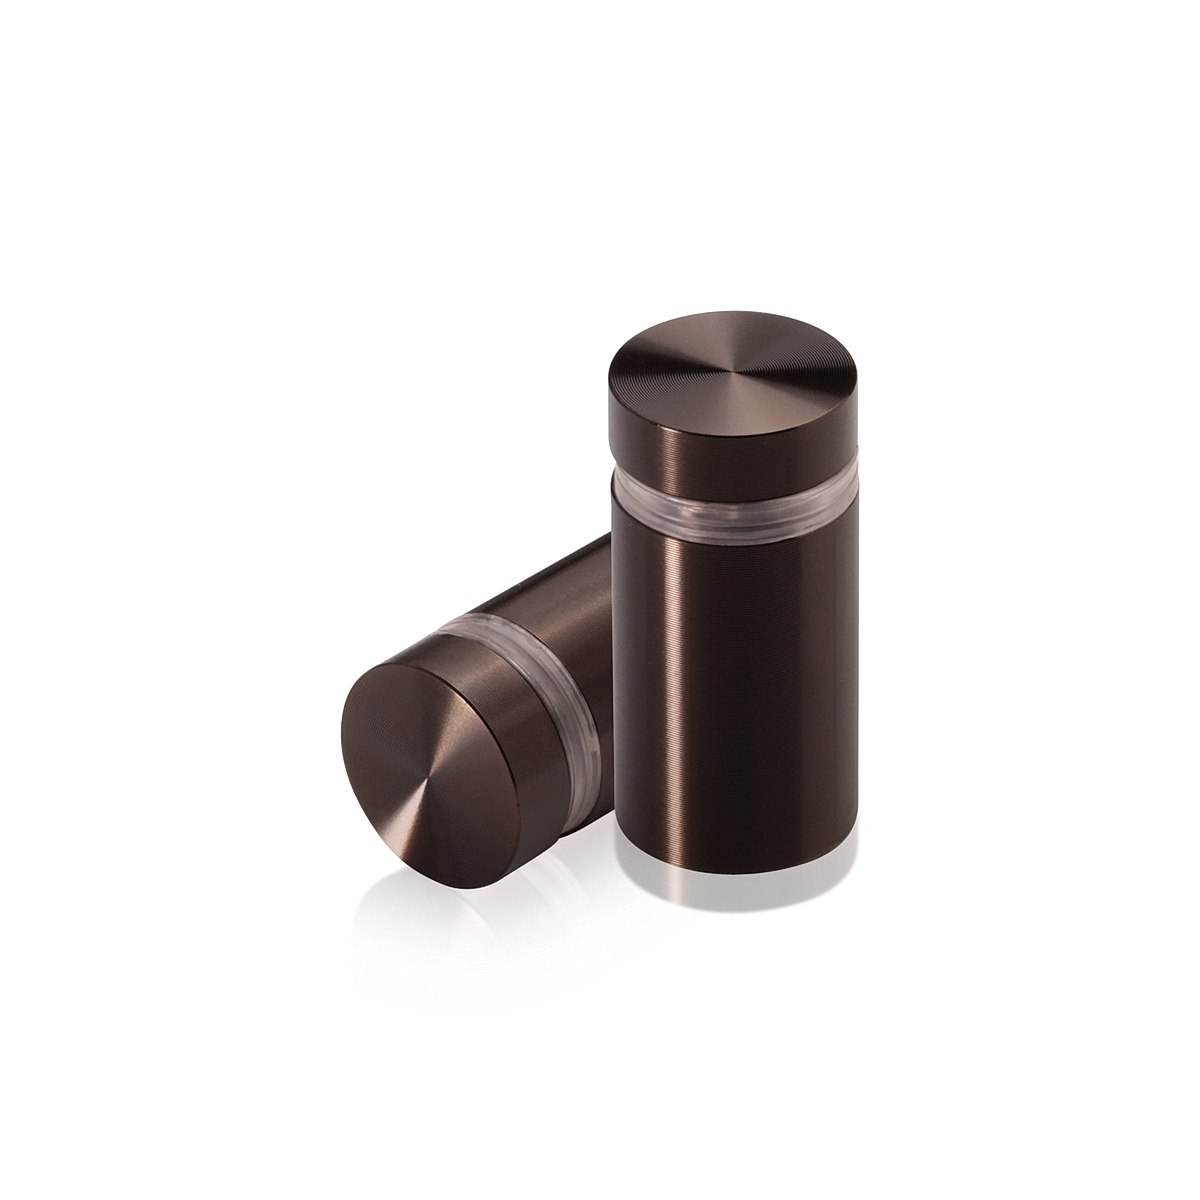 5/8'' Diameter X 1'' Barrel Length, Aluminum Flat Head Standoffs, Bronze Anodized Finish Easy Fasten Standoff (For Inside / Outside use) Tamper Proof Standoff [Required Material Hole Size: 7/16'']